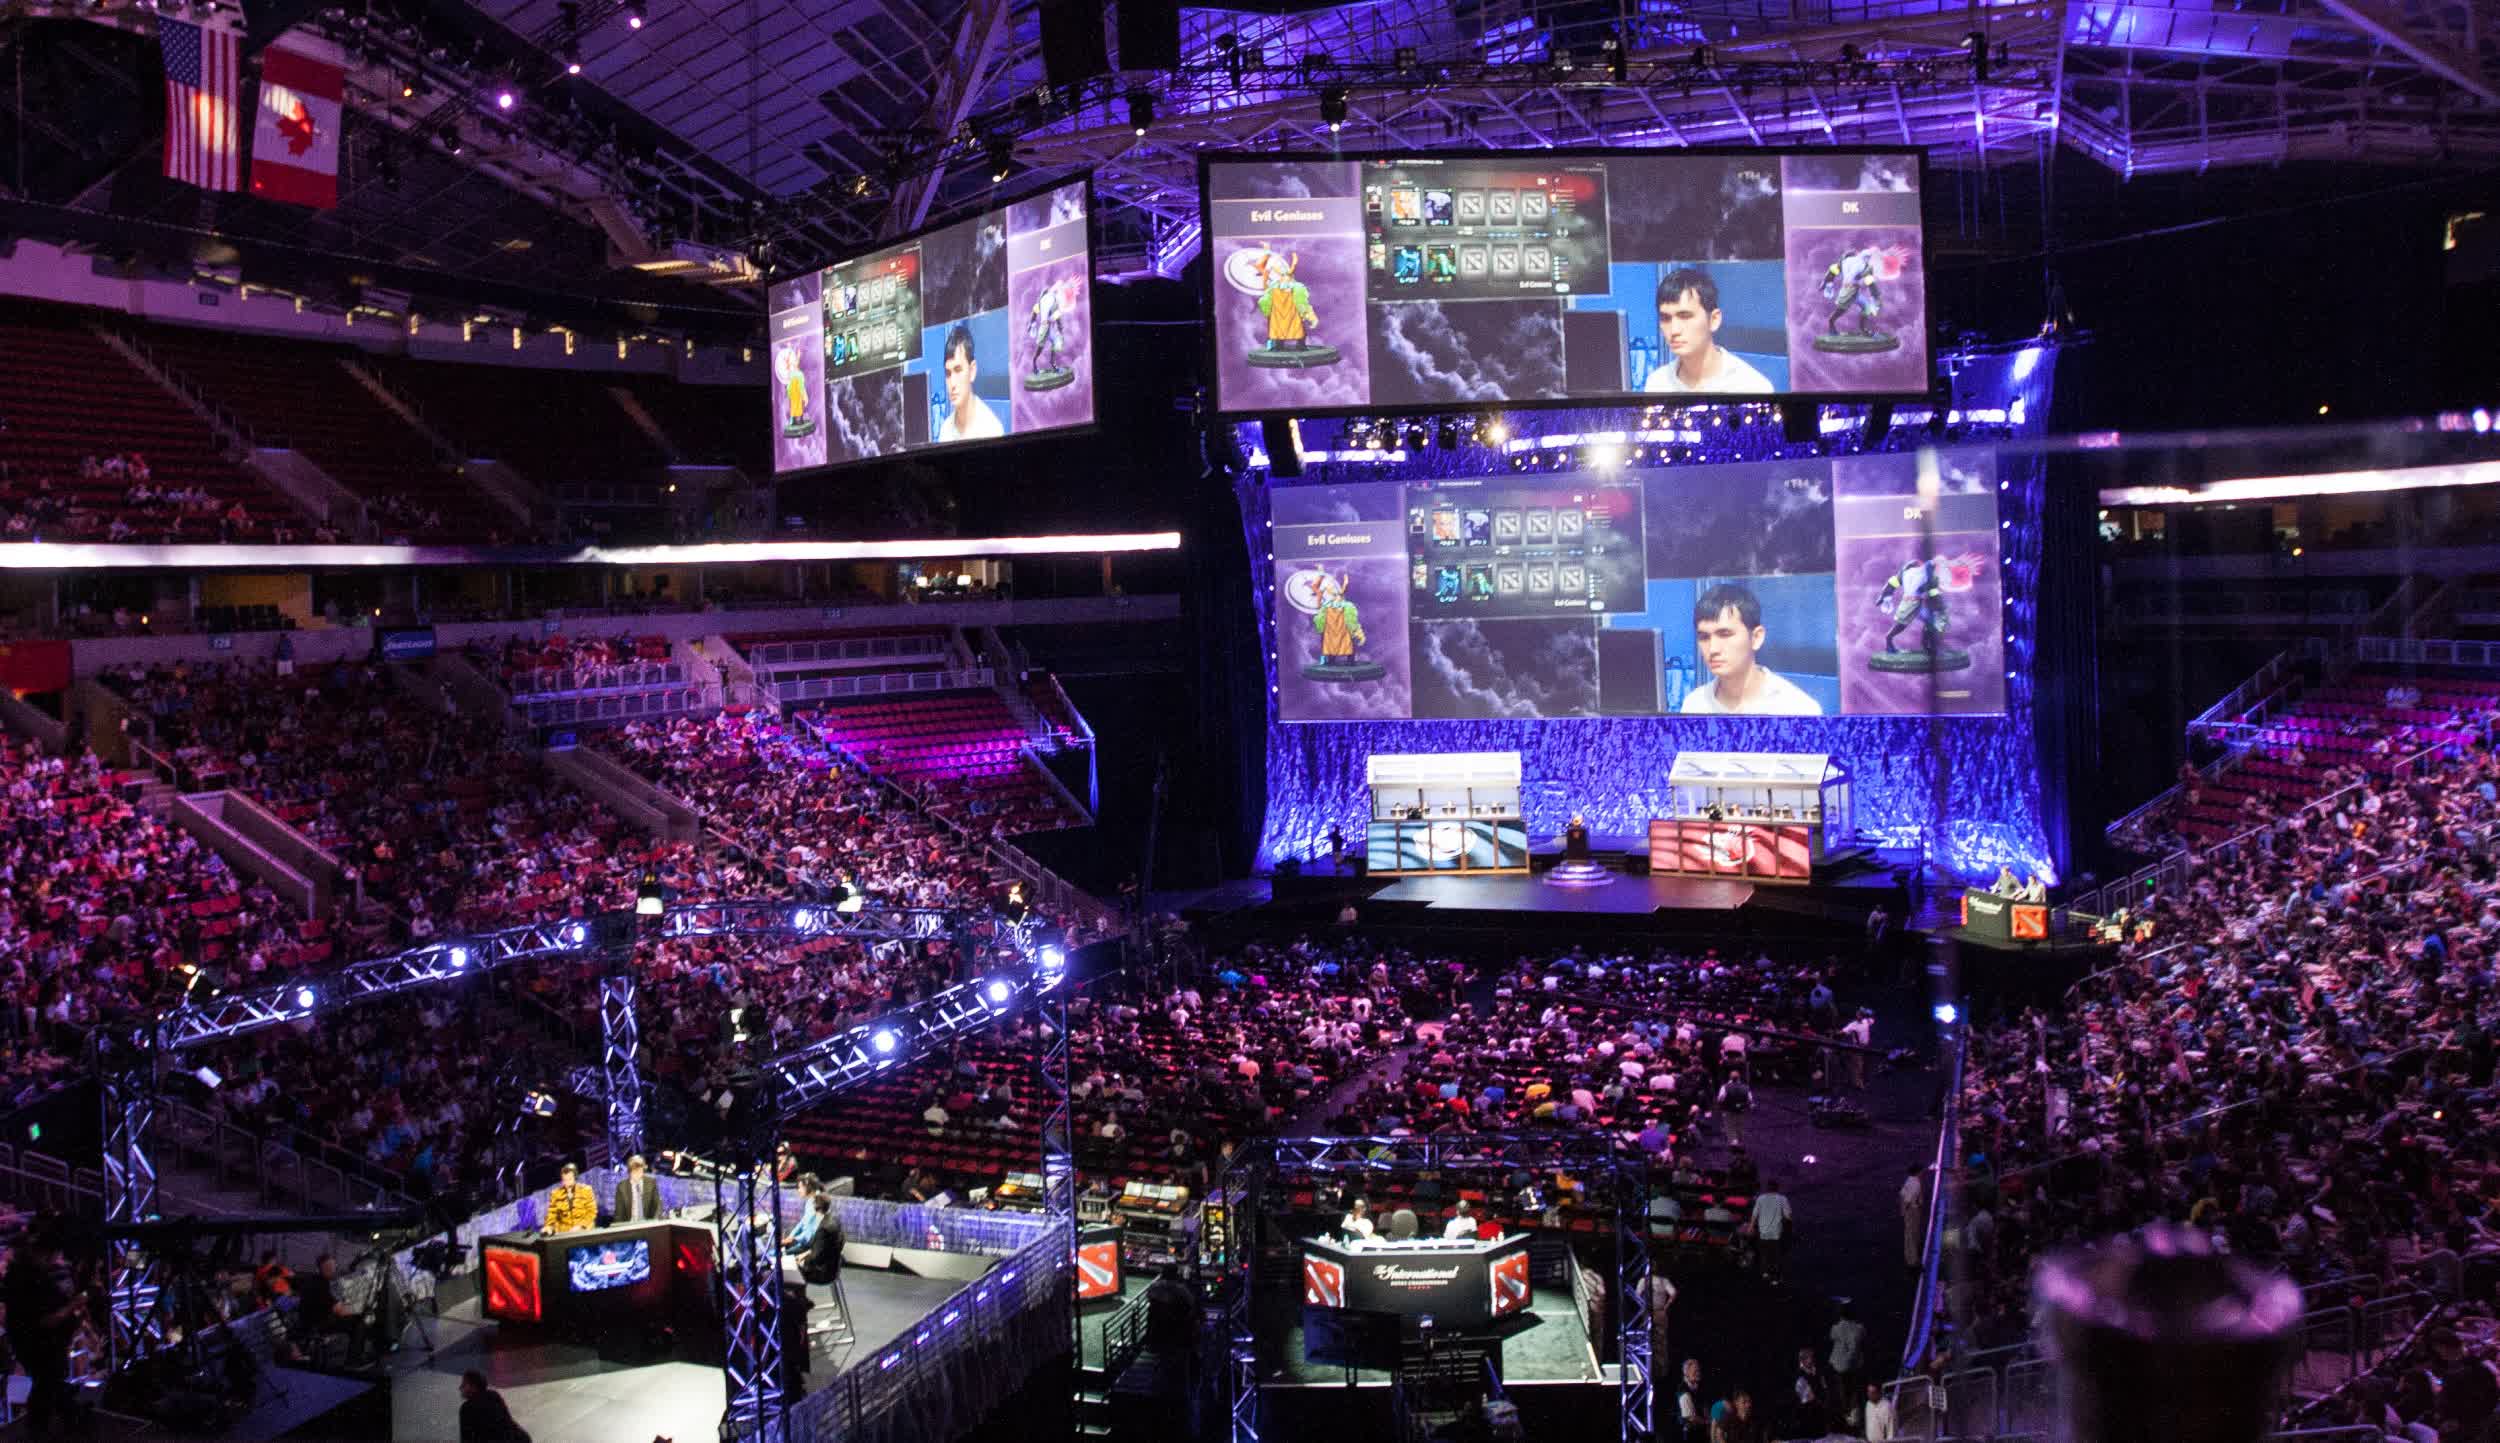 Dota 2's The International tournament is returning to Seattle this year